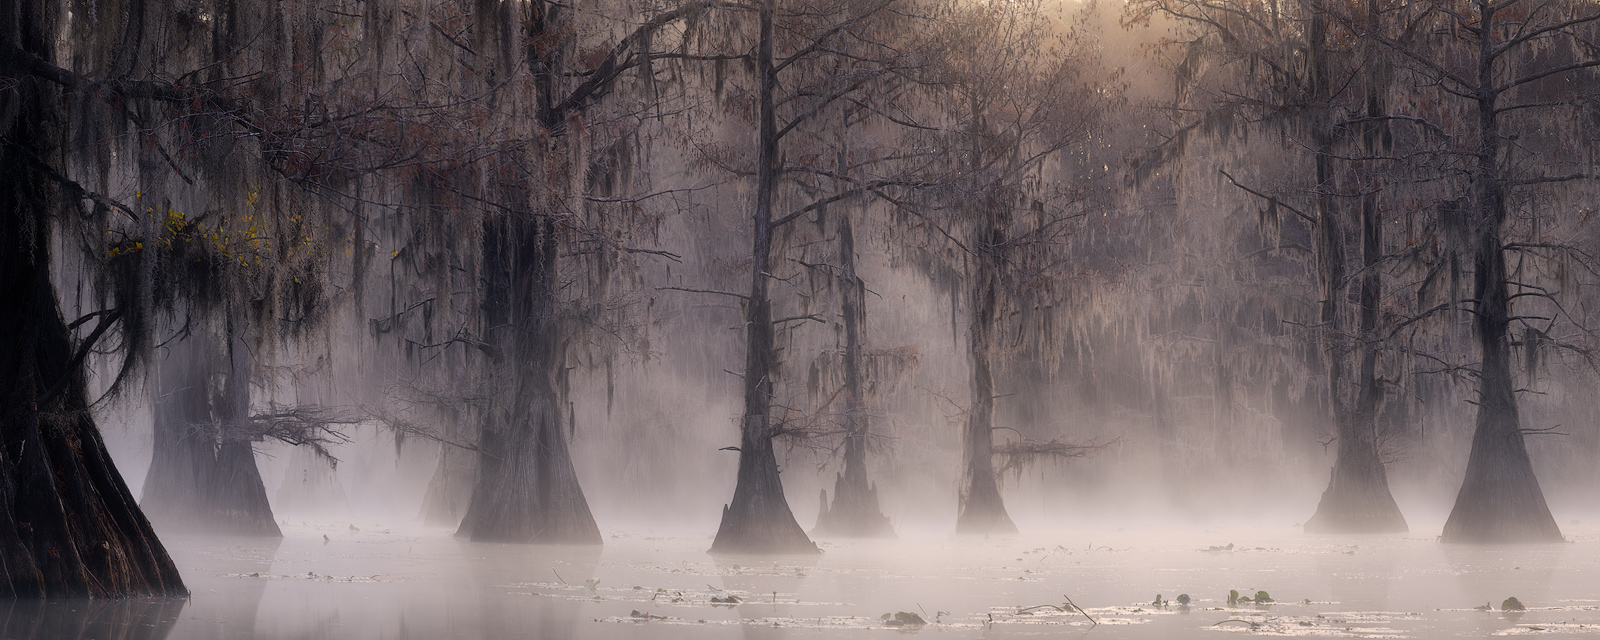 A foggy and misty morning creates a magical scene in the bayou at sunrise.